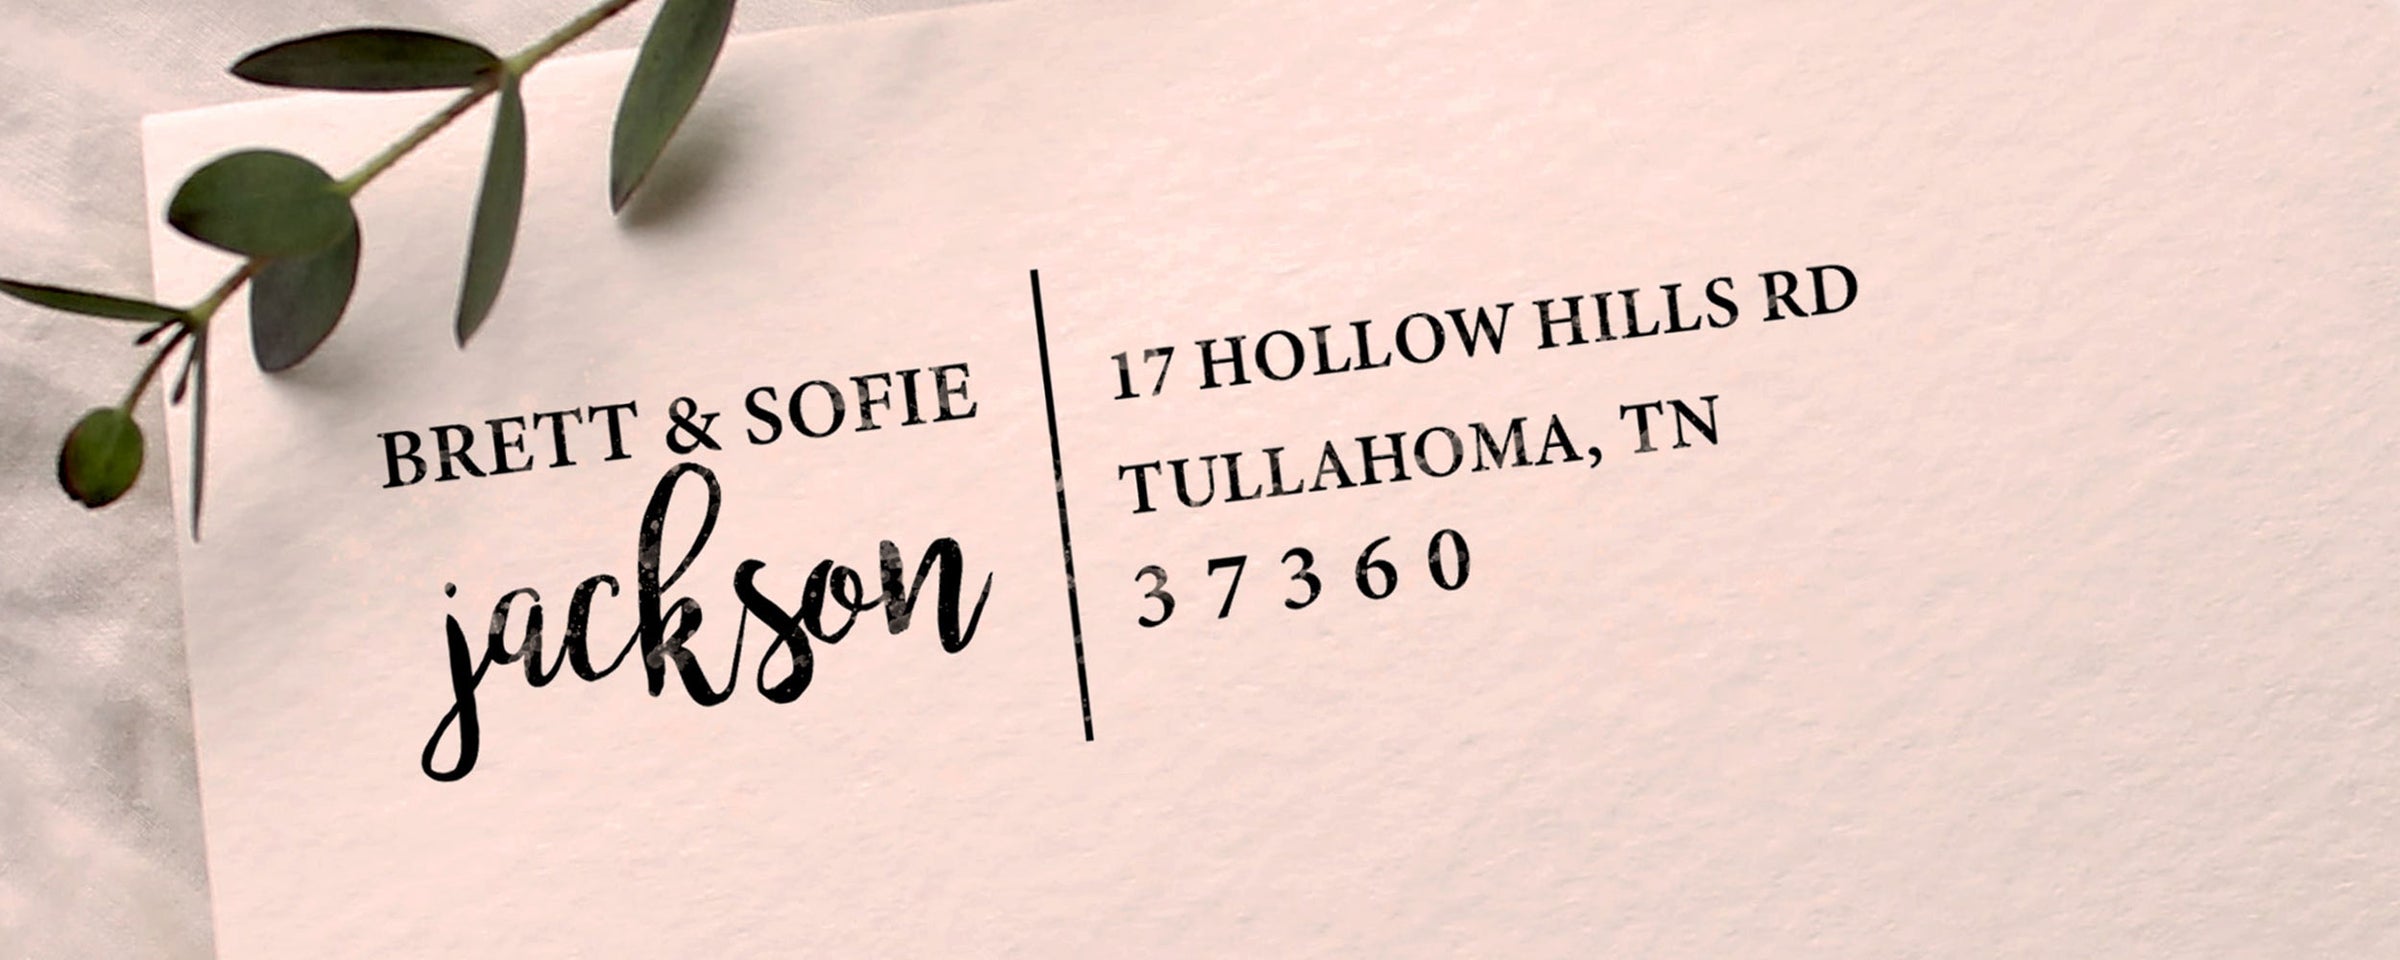 An envelope with a custom return address stamp for Brett & Sofie Jackson featuring their address in Tullahoma TN beside a sprig with green leaves